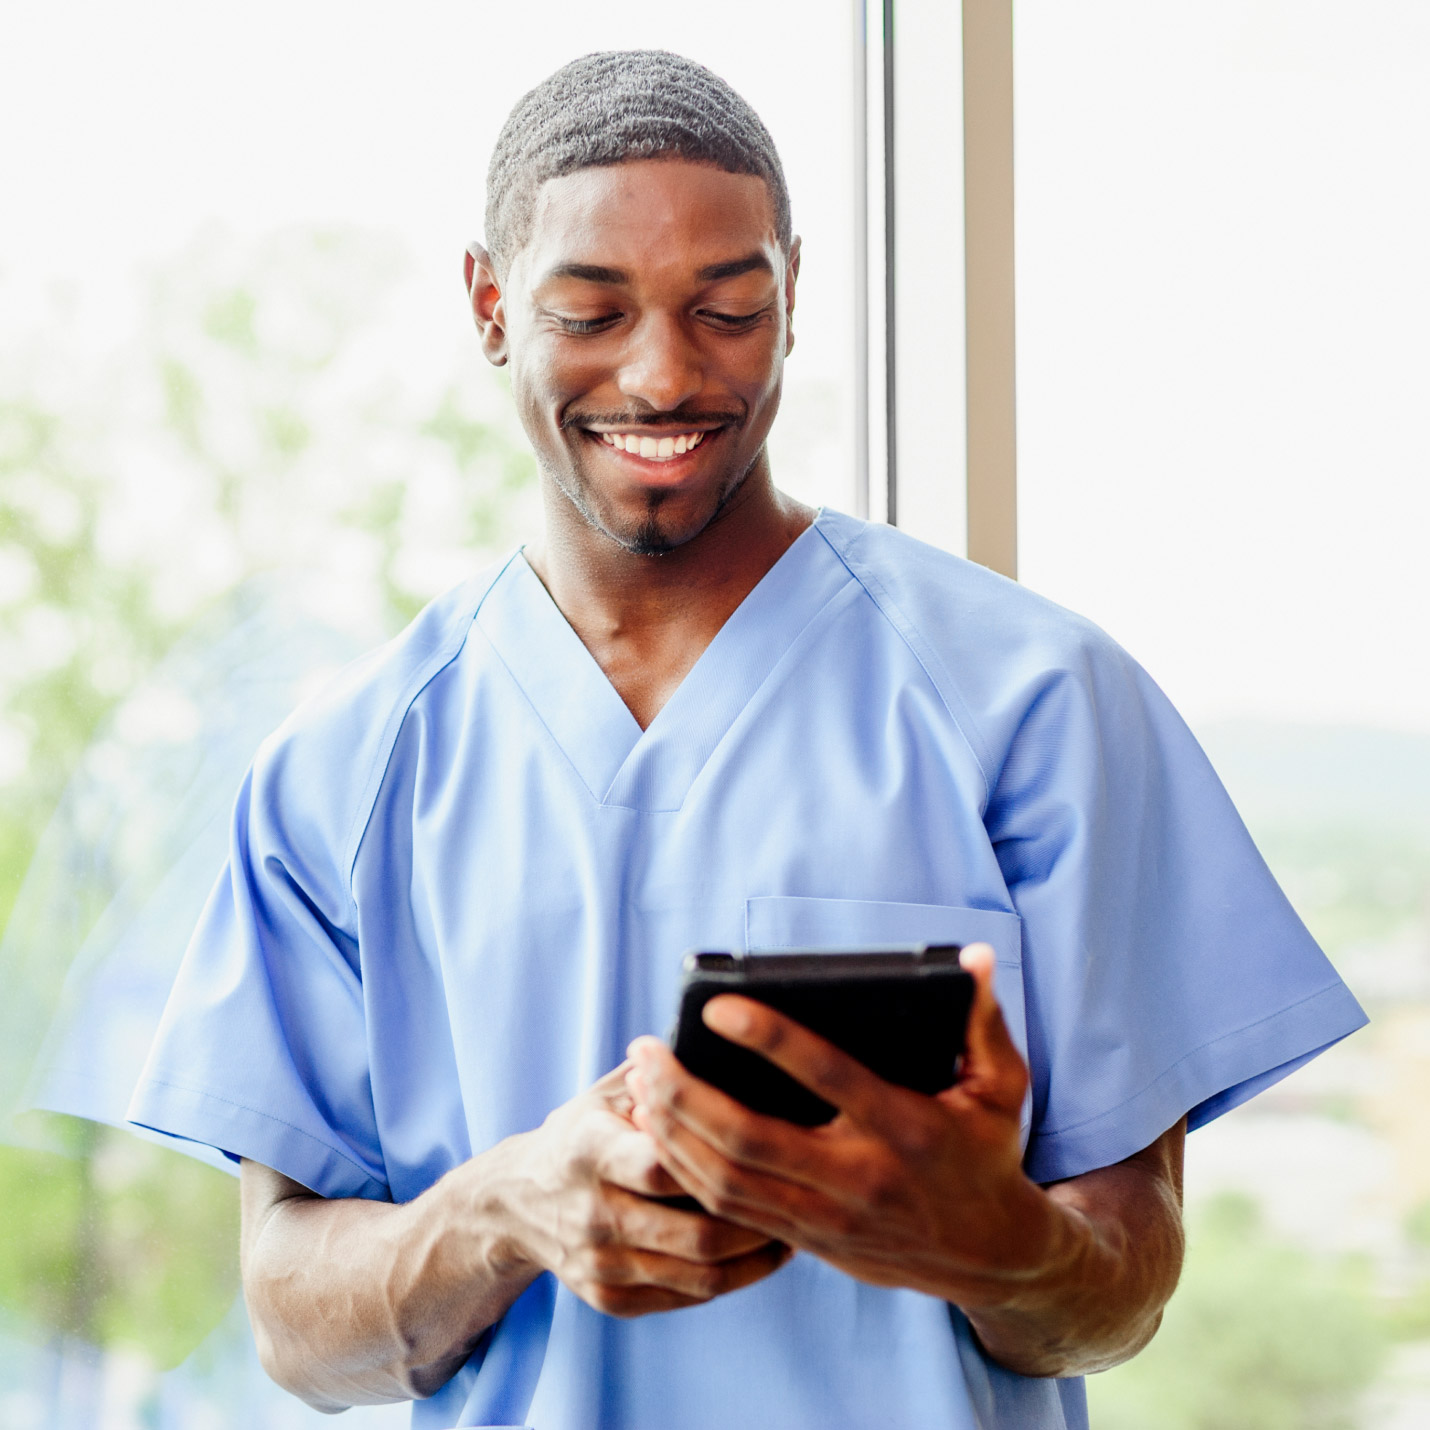 A nurse smiling while reviewing patient info on a tablet during an in-home visit.